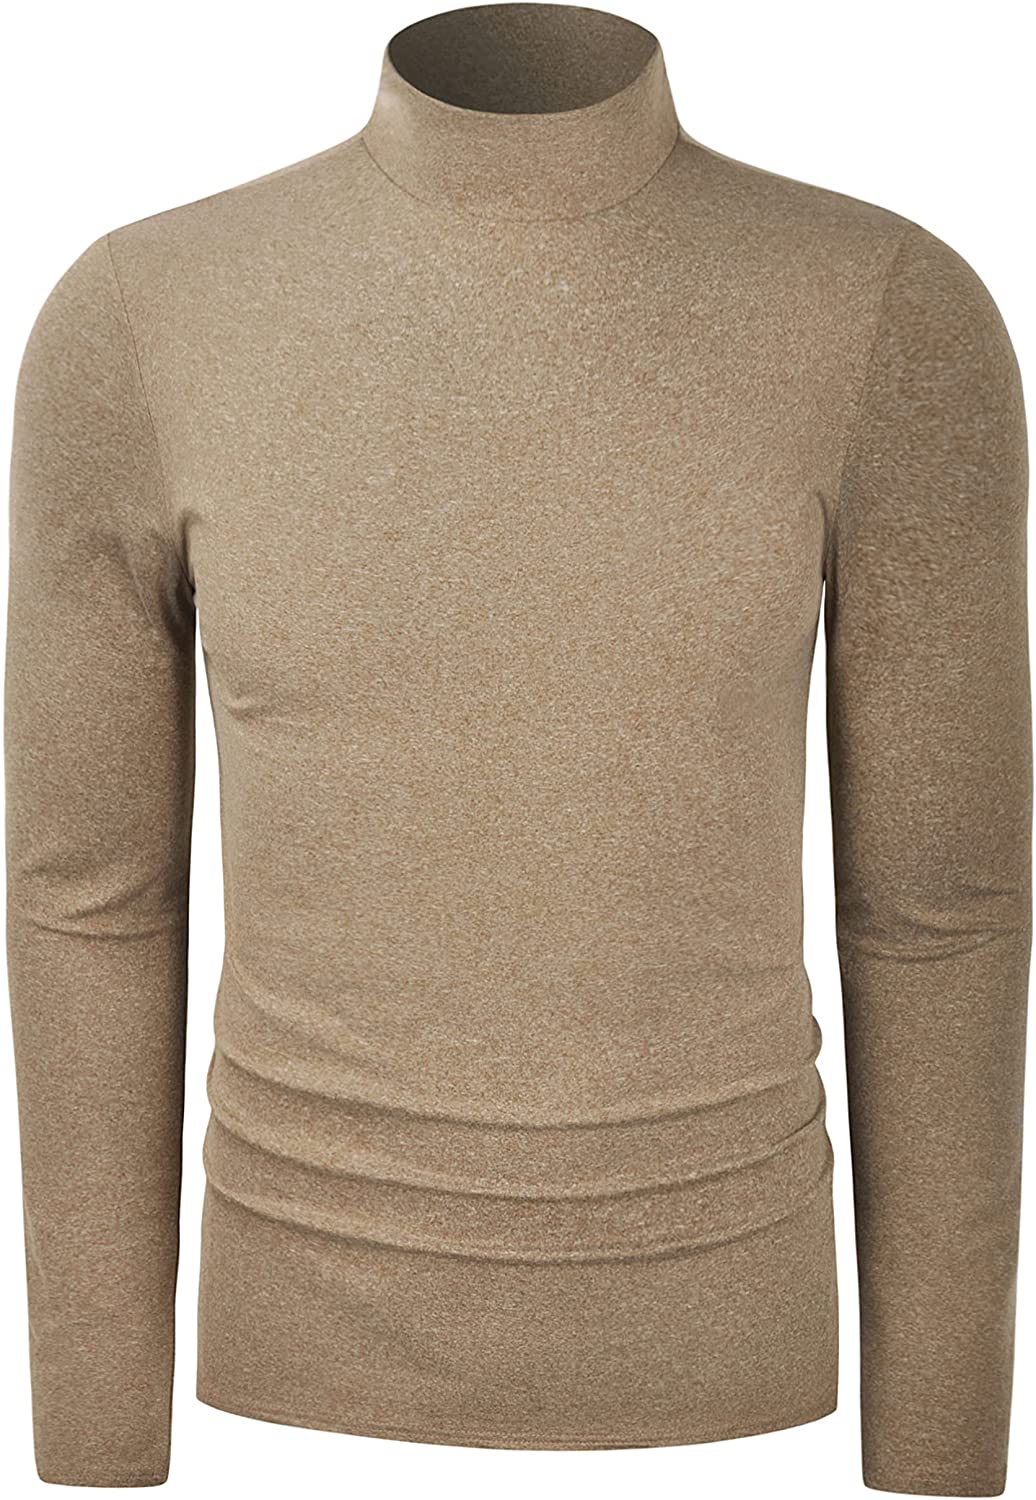 TAPULCO Men Turtleneck Long Sleeve Knitted Pullover Basic Slim Fit Casual Soft Comfy T Shirts 